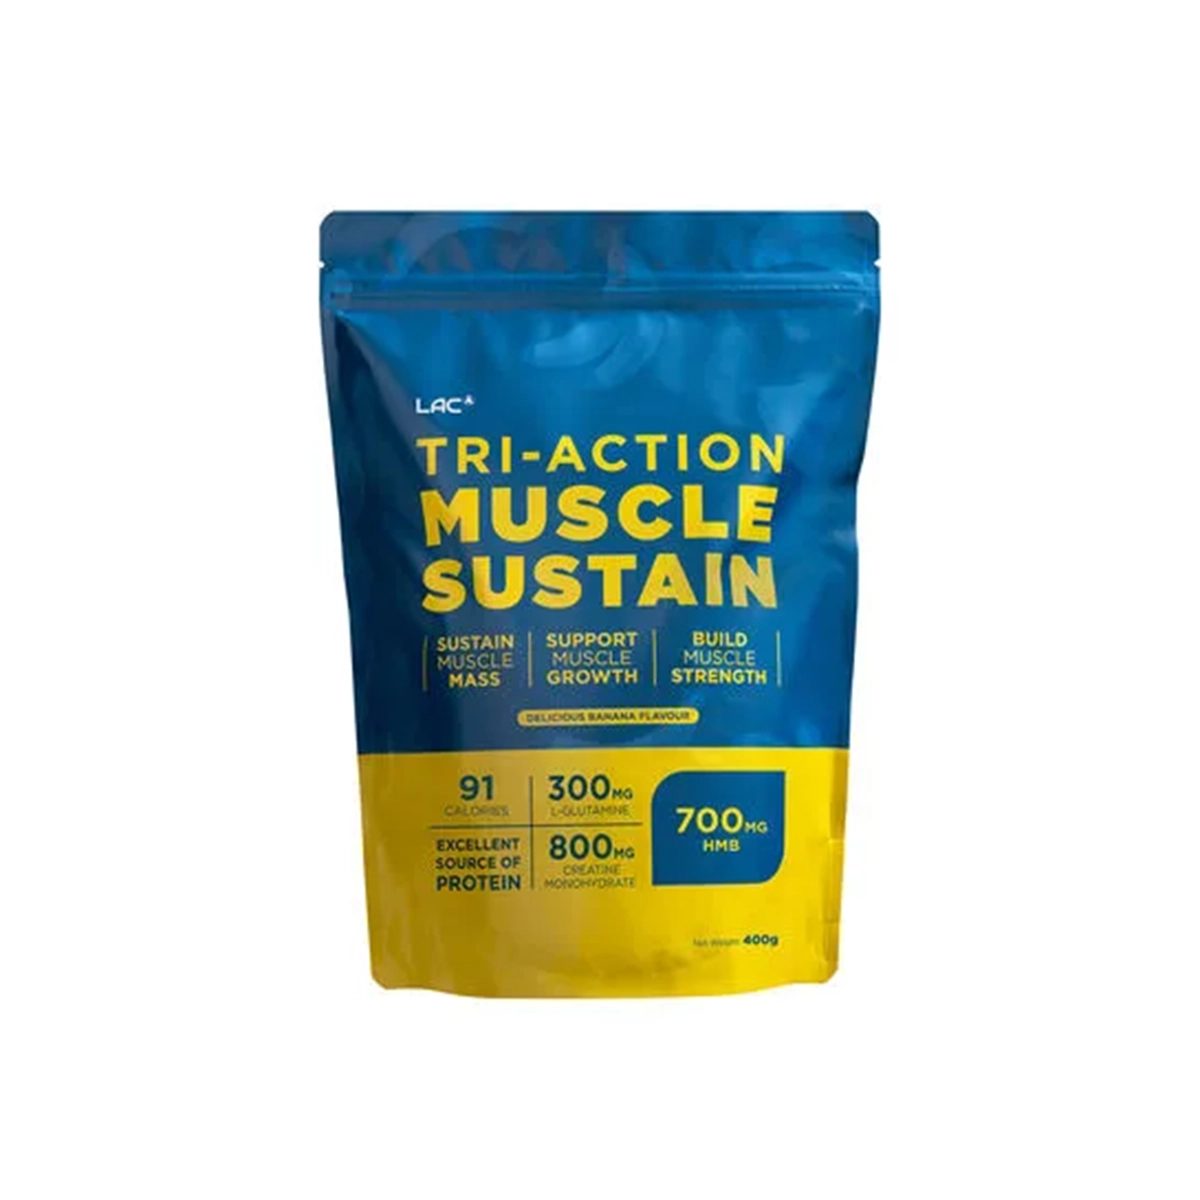 First product image of LAC PROTEIN Tri-Action Muscle Sustain - Muscle Mass Booster 400g